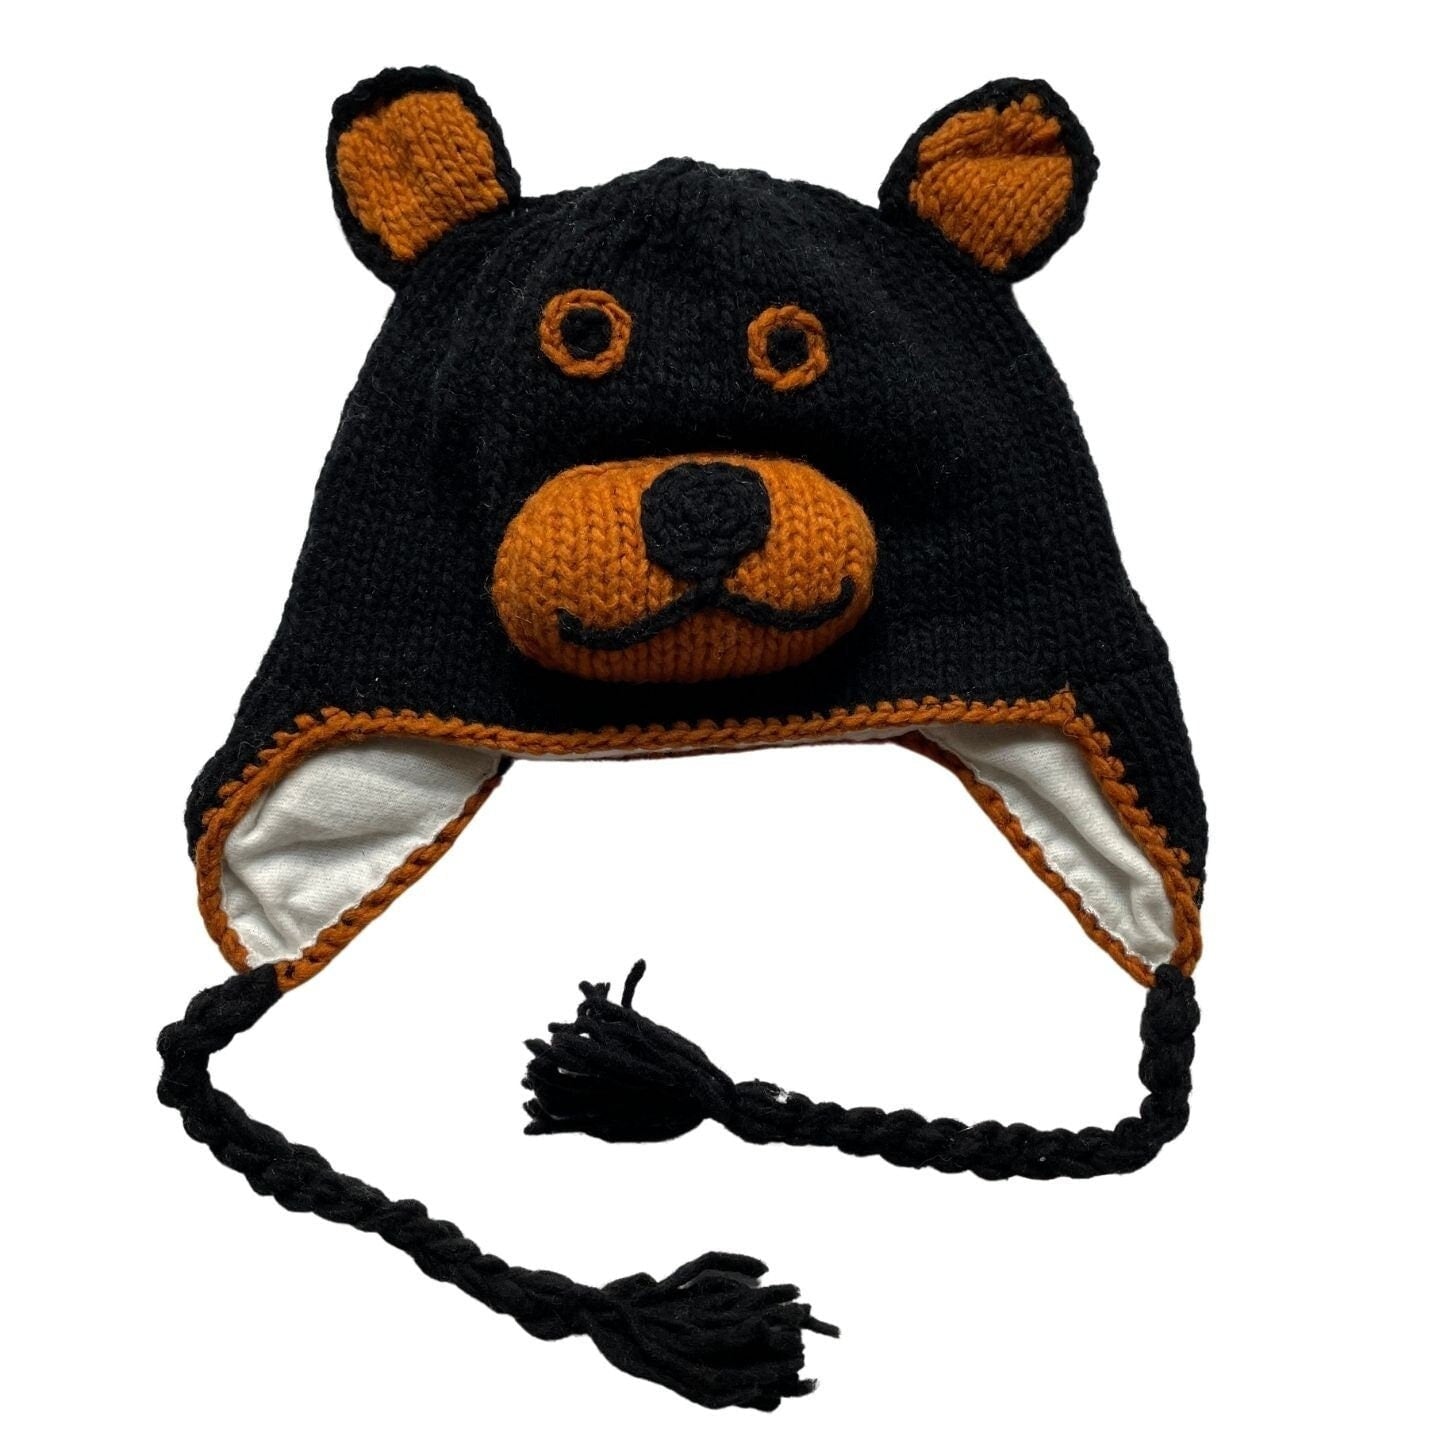 Black Bear Beanie Hat for Kids and Adults